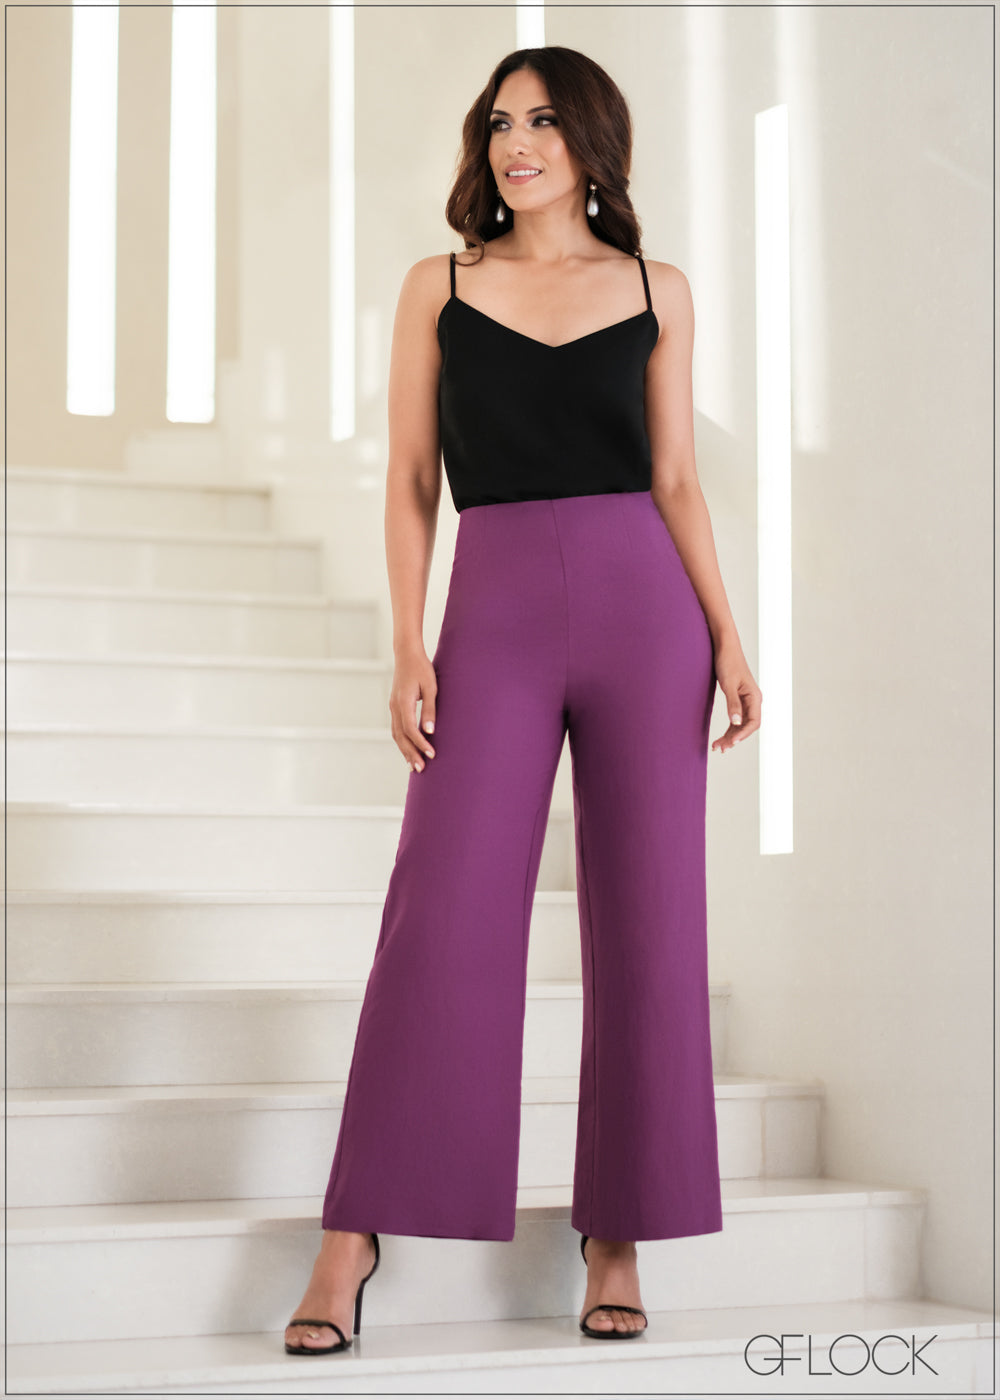 Inspire Flare Pant - Black crepe – Eloise the label